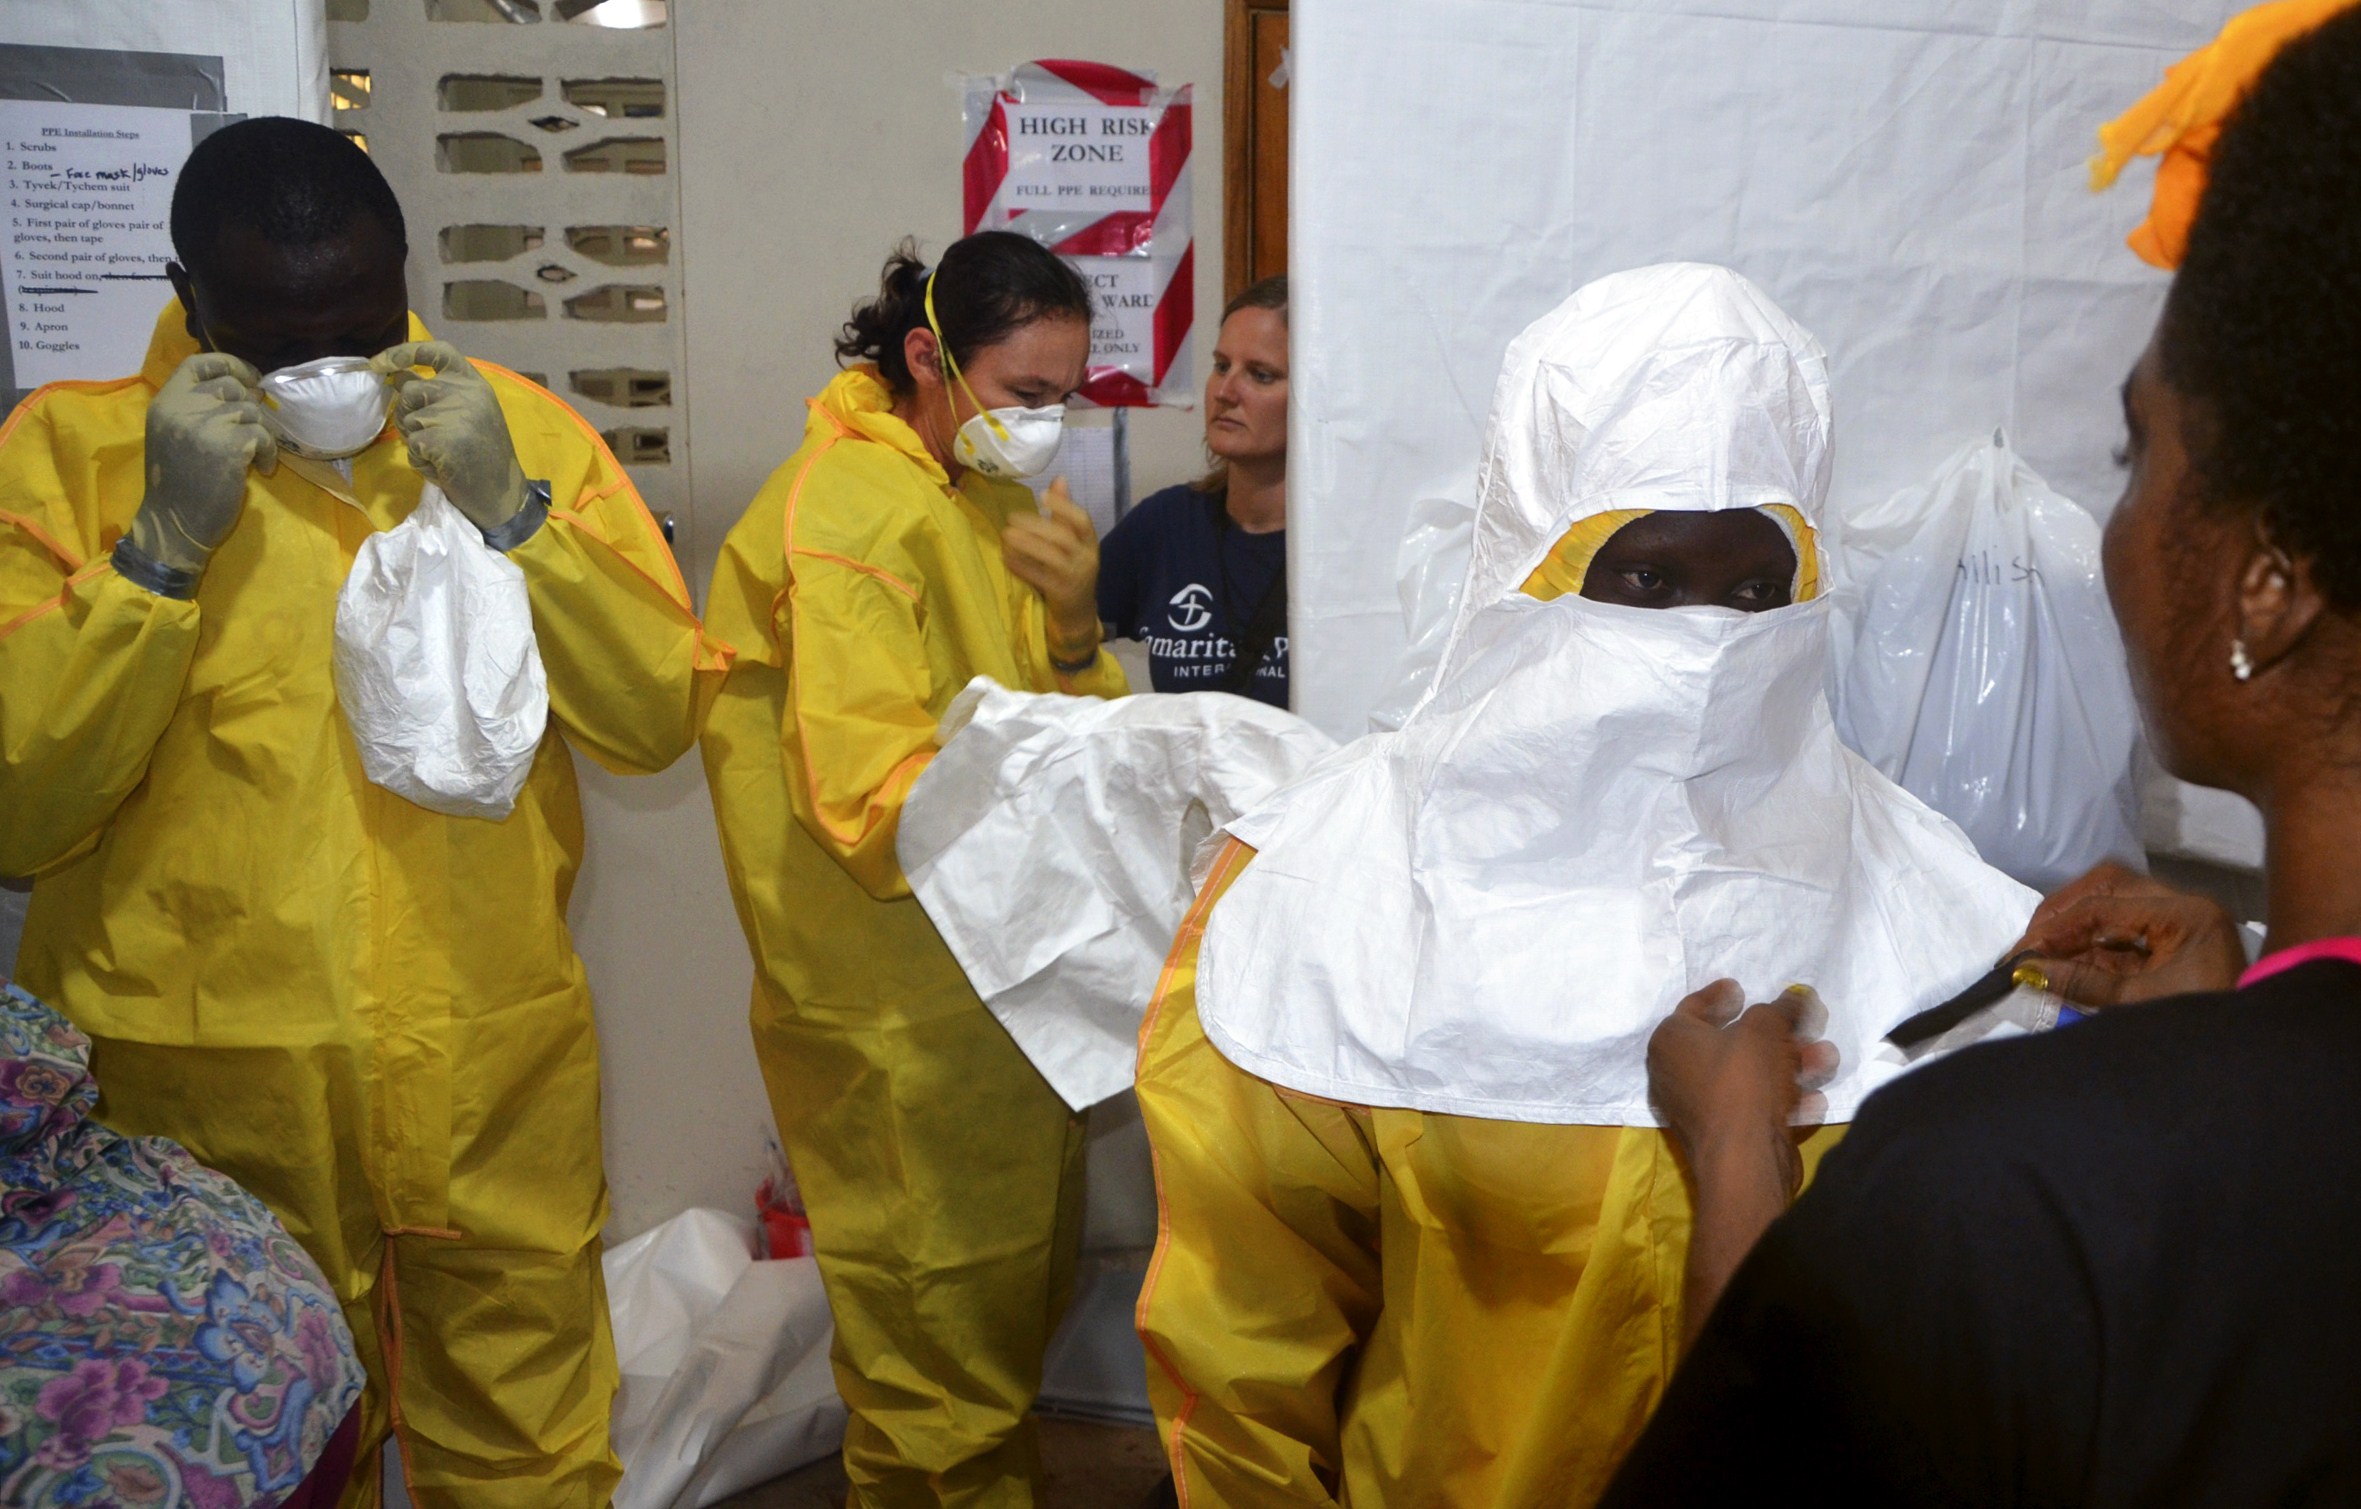 Staff of the Christian charity Samaritan's Purse putting on protective gear in the ELWA Hospital in Monrovia, Liberia, on July 24, 2014 (Zoom Dosso—AFP/Getty Images)